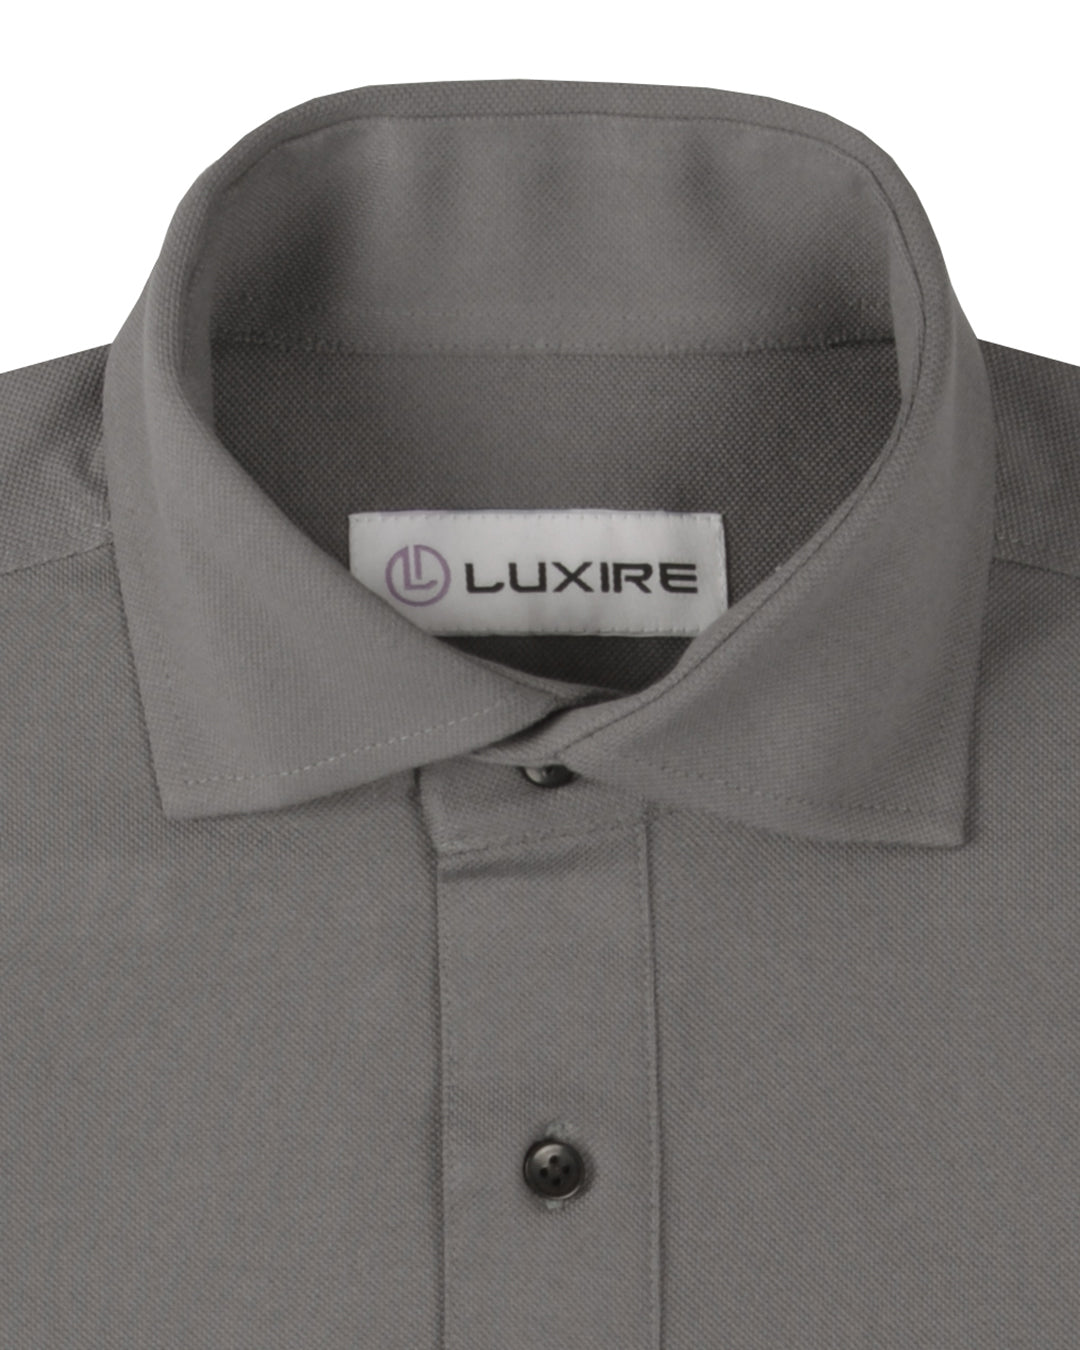 Collar of the custom oxford polo shirt for men by Luxire in soft grey